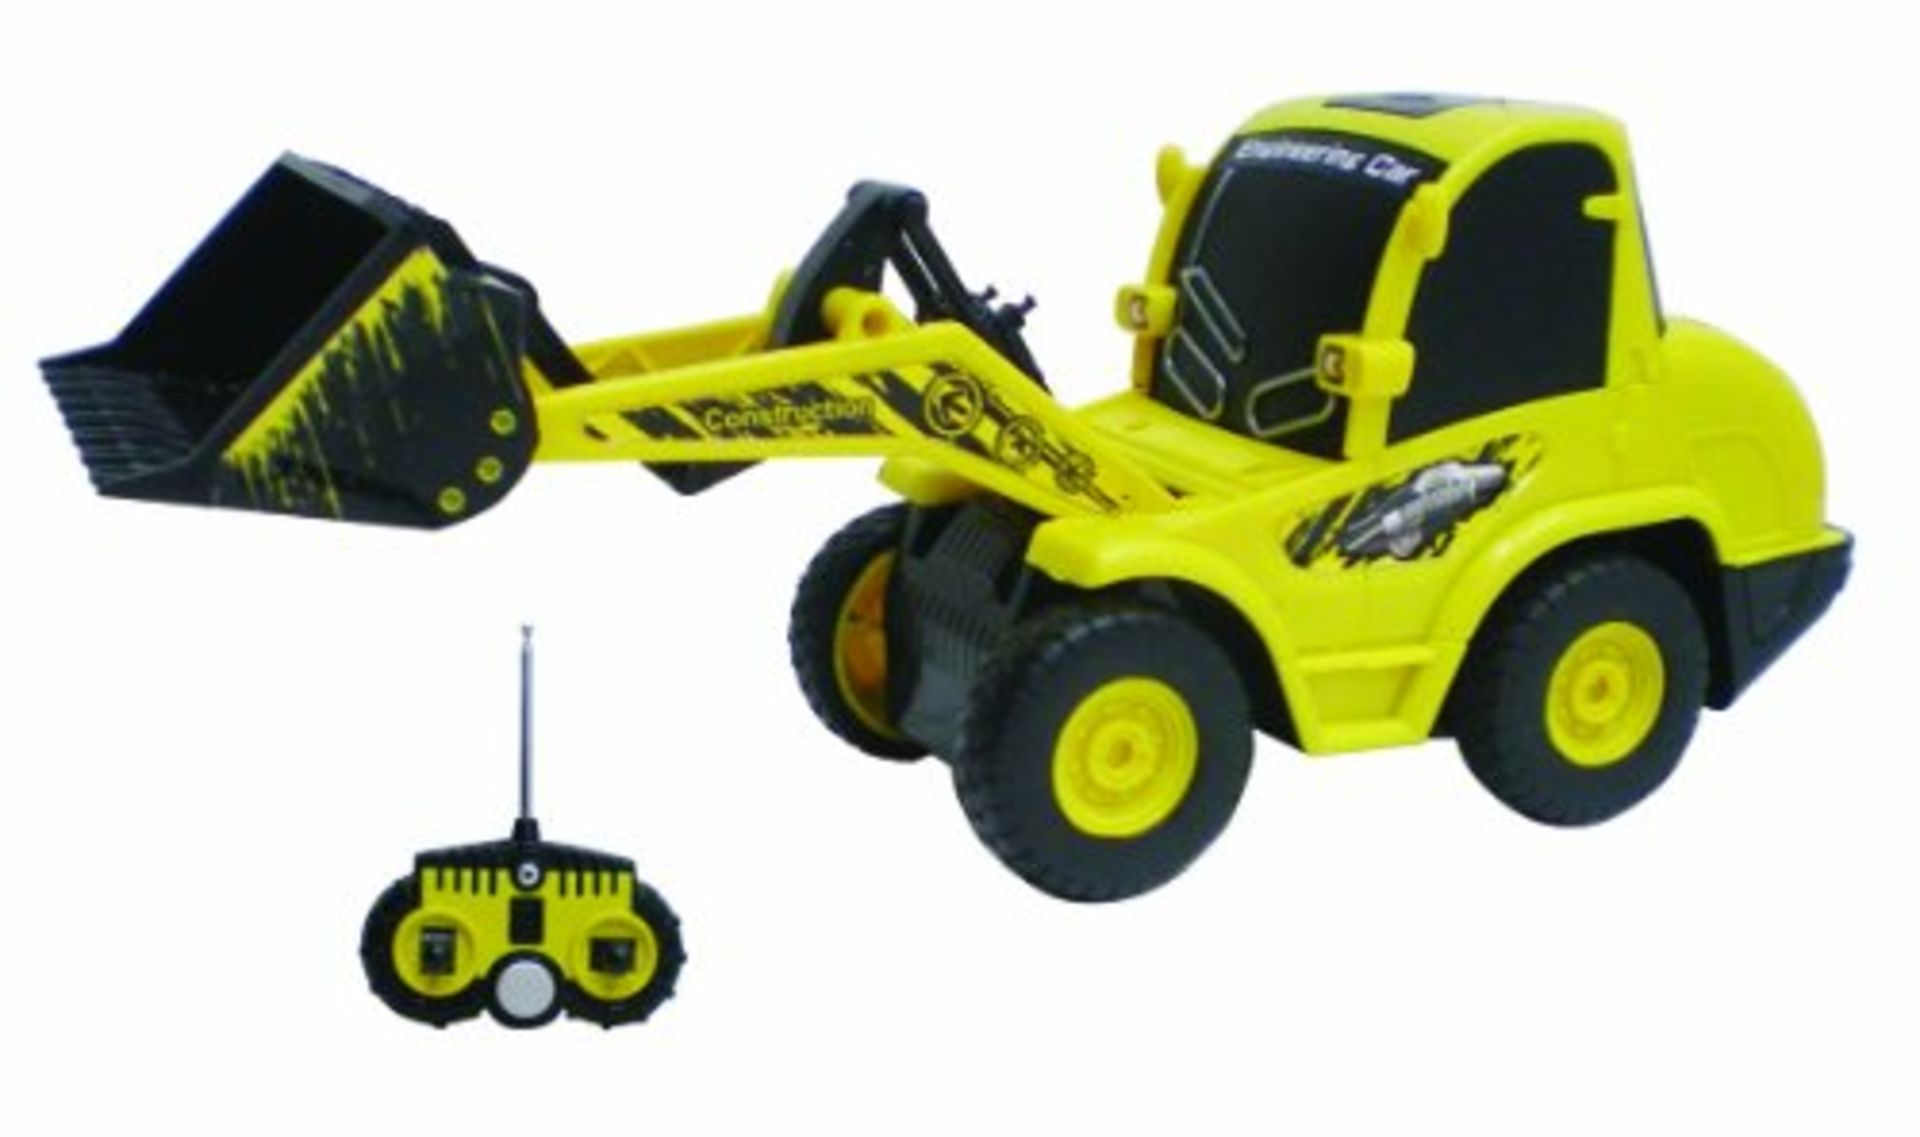 V Brand New Radio Control Construction Digger 1:20 RRP ú79.99 X 2 YOUR BID PRICE TO BE MULTIPLIED BY